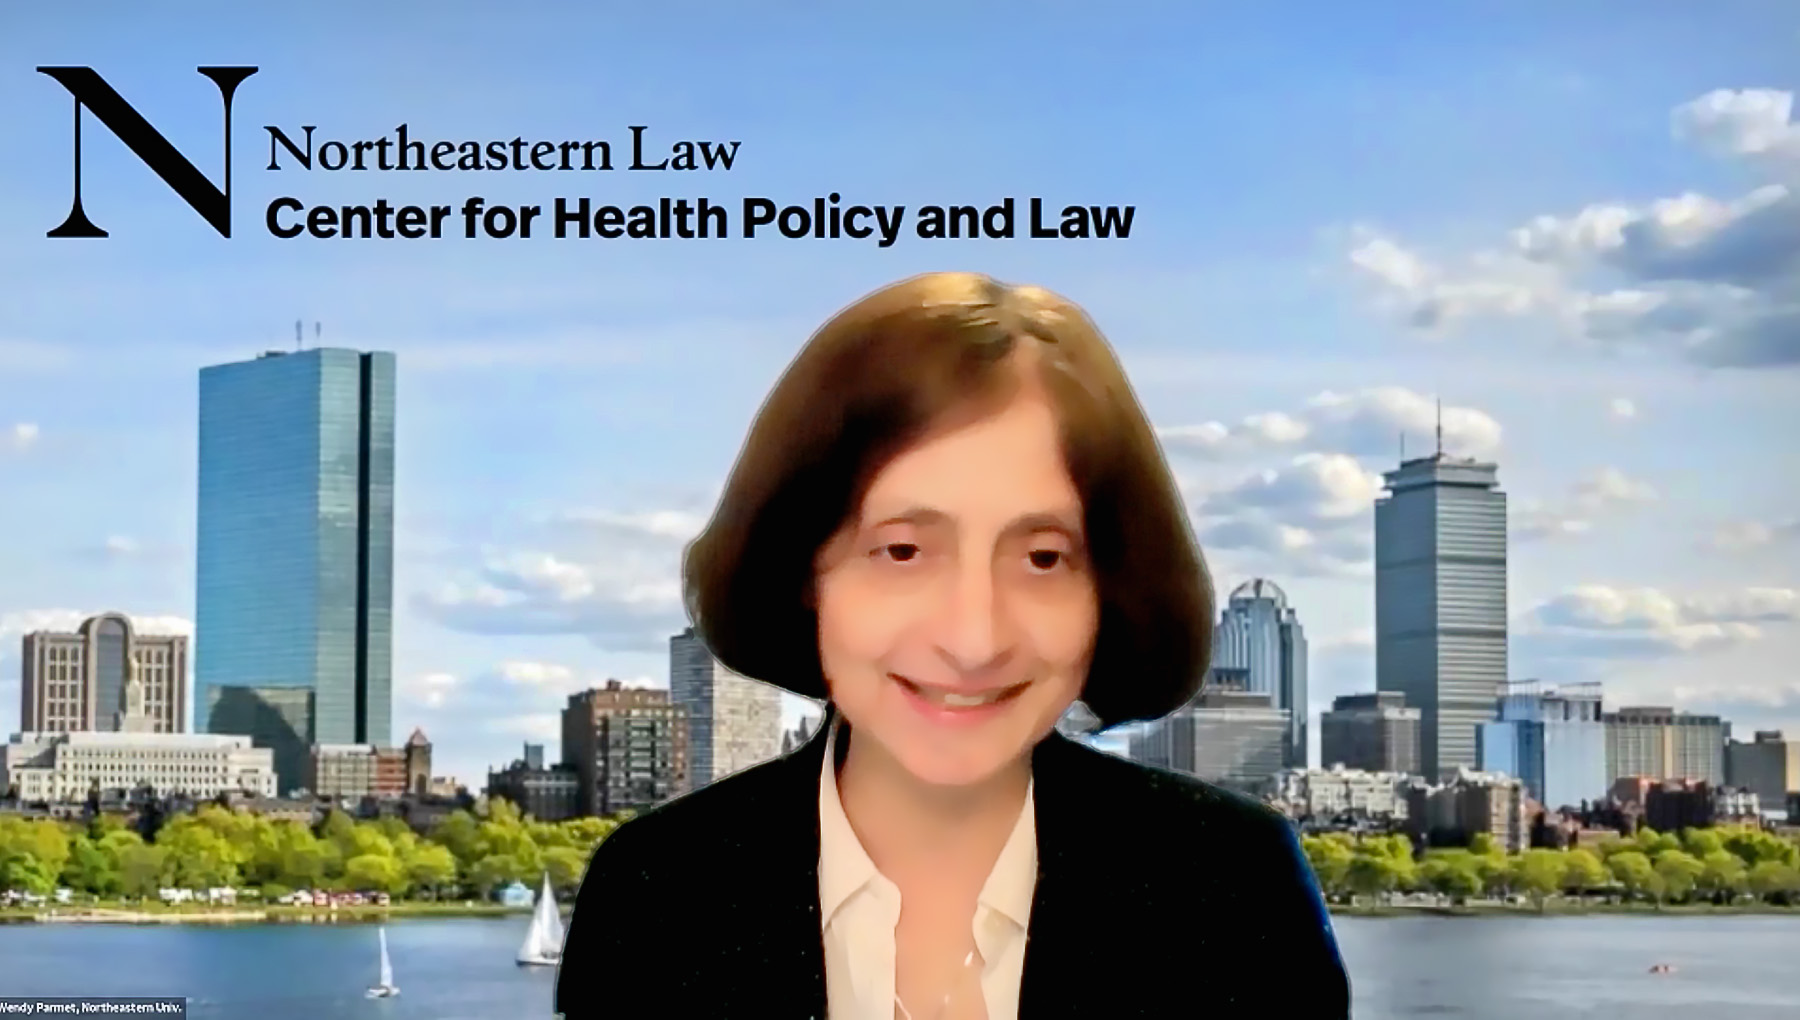 Professor Wendy Parmet, director of Northeastern Law's Center for Health Policy and Law